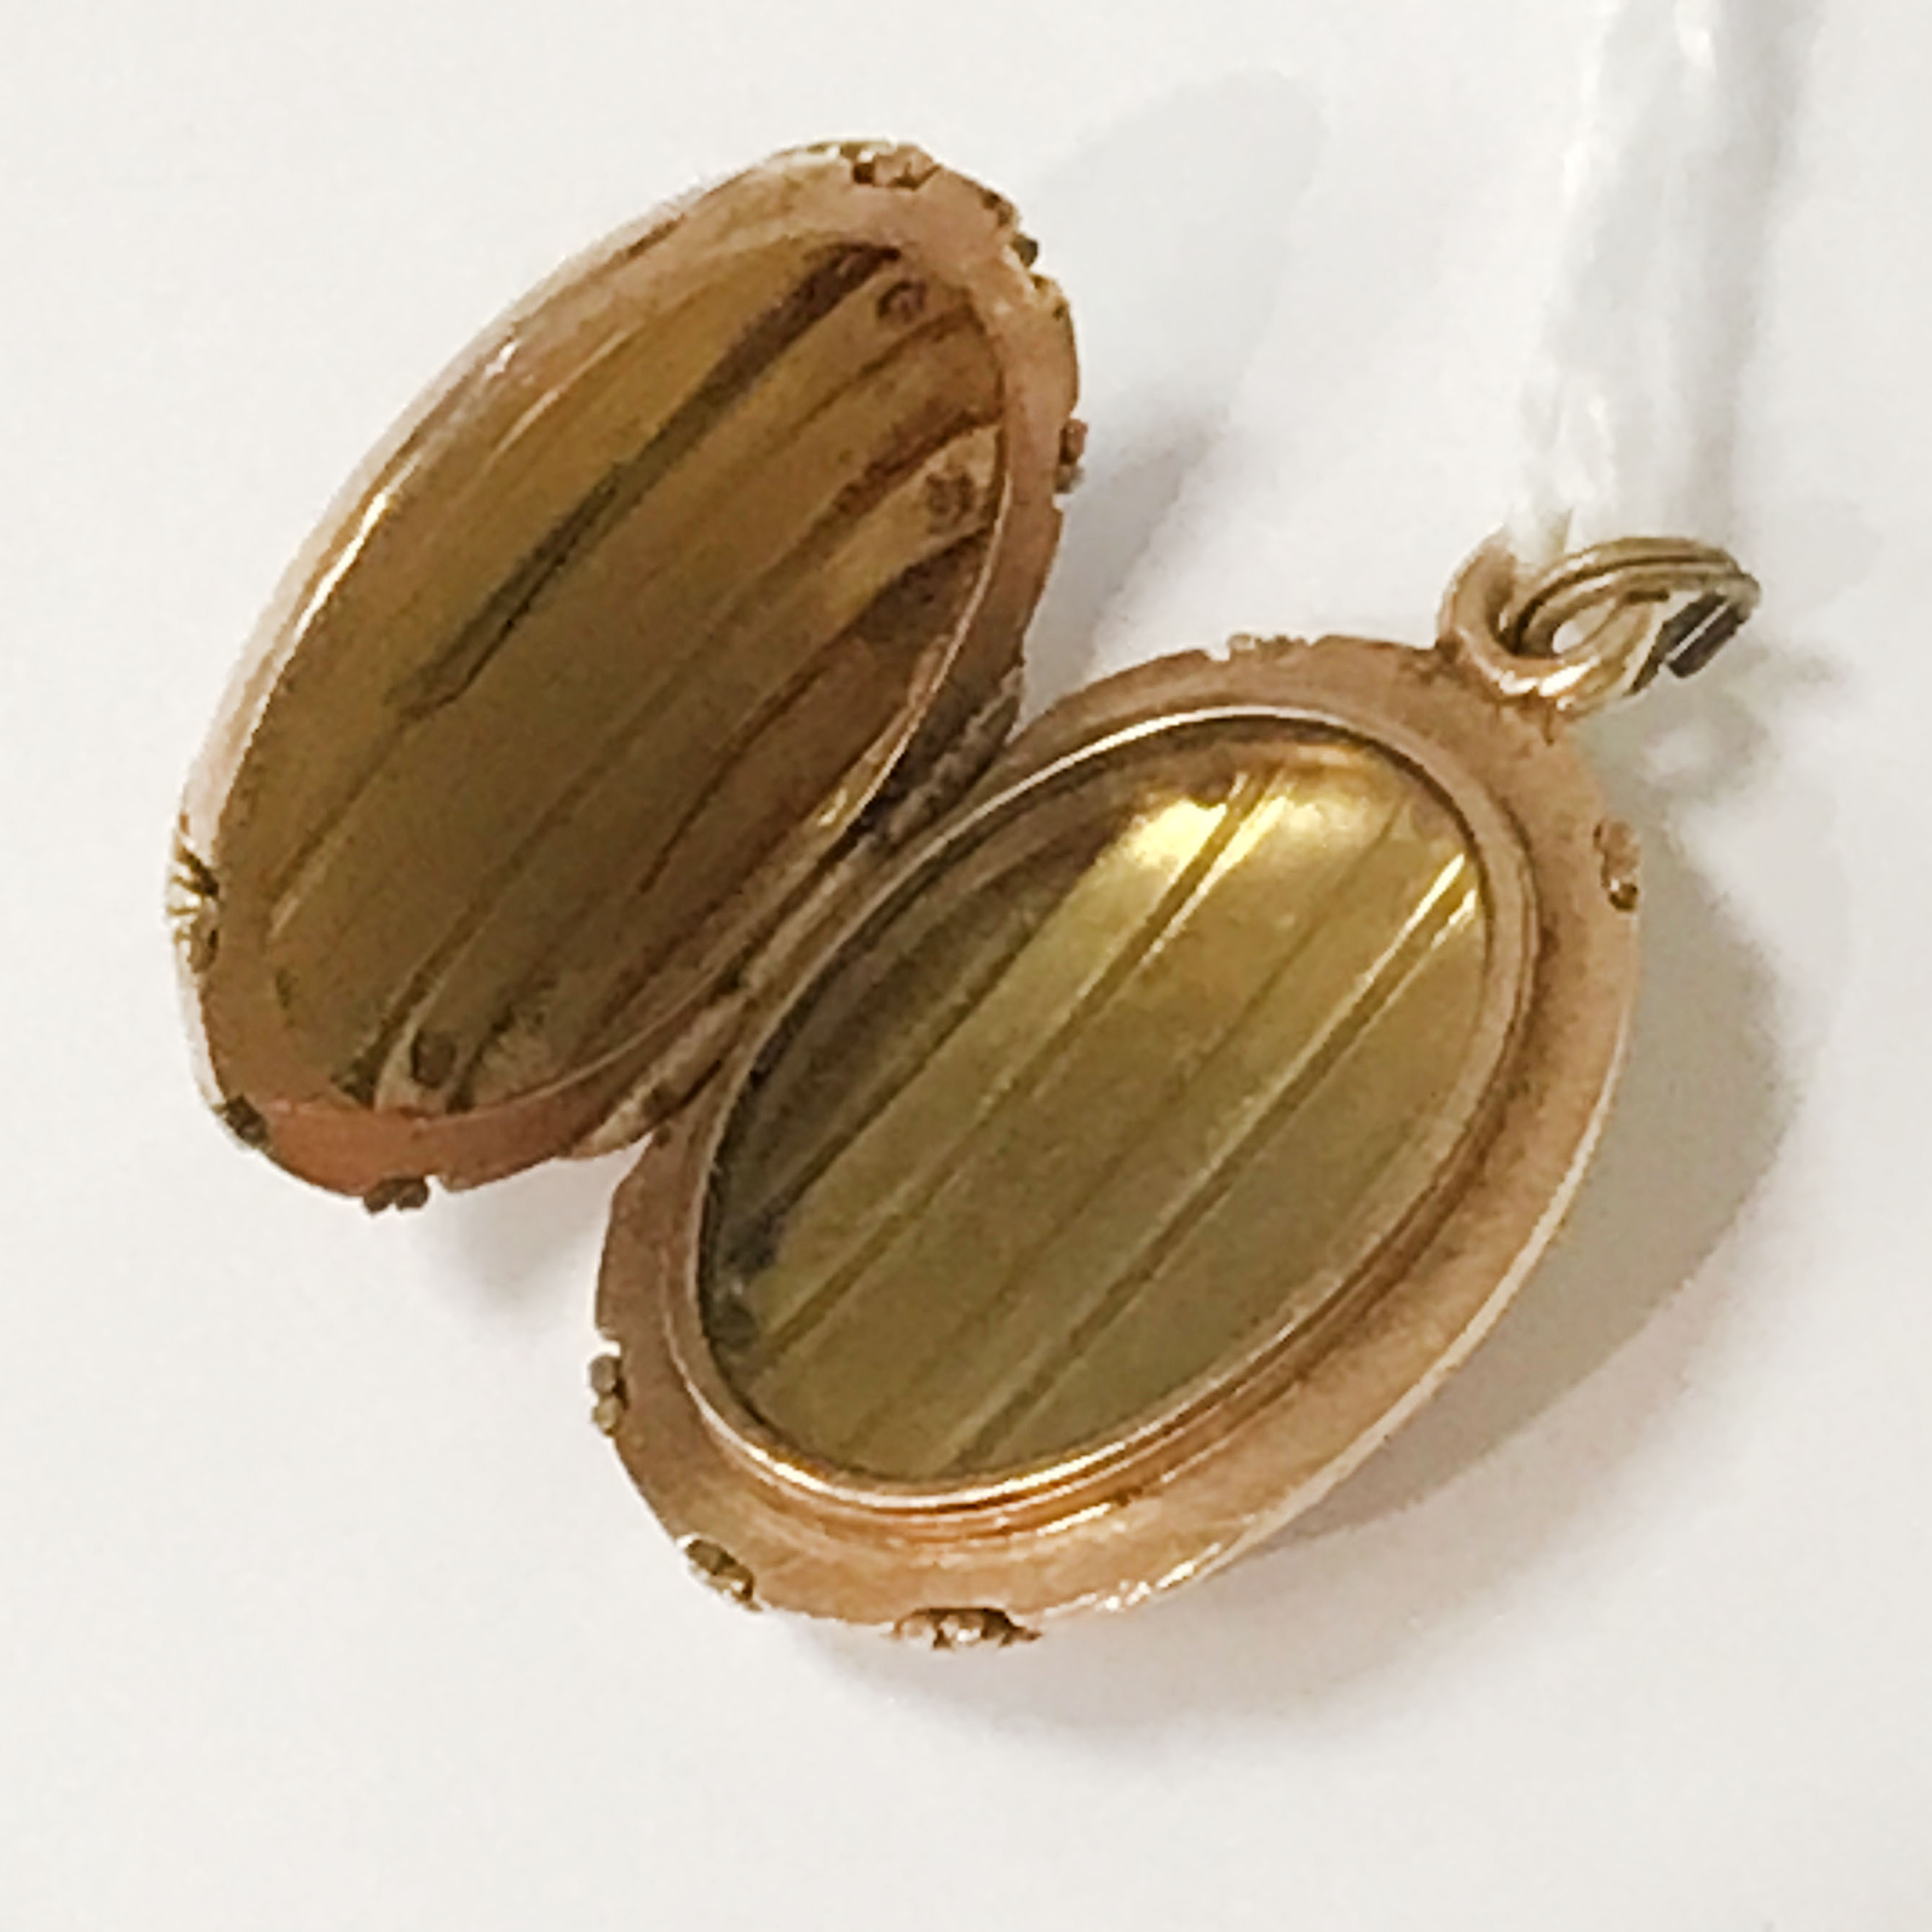 HIGH CARAT GOLD LOCKET - POSSIBLY 18CT - 10.5 grams - Image 3 of 3